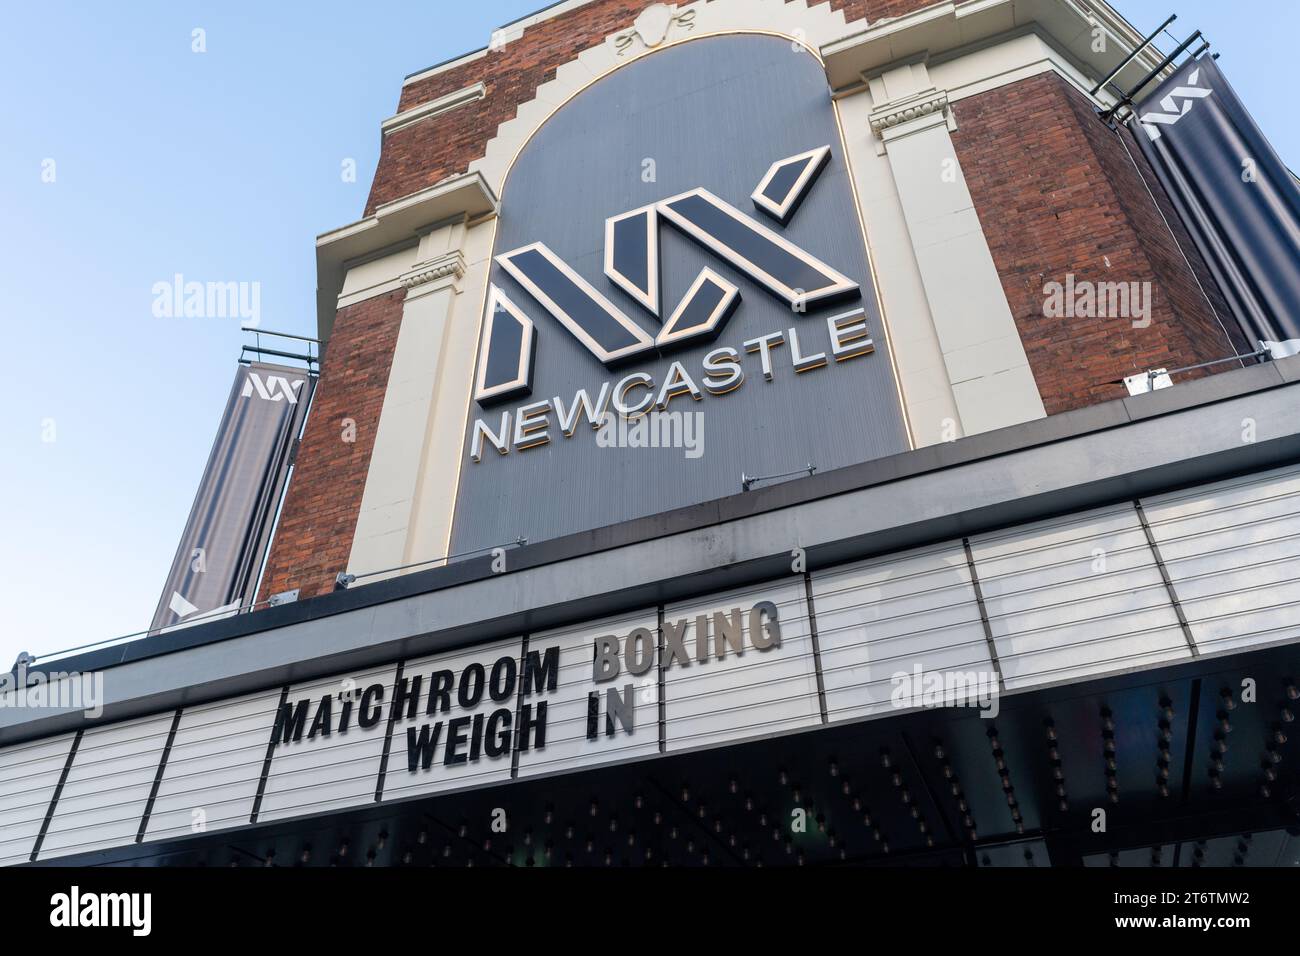 NX venue in the city of Newcastle upon Tyne, UK, with a sign advertising Matchroom Boxing Weigh In. Stock Photo